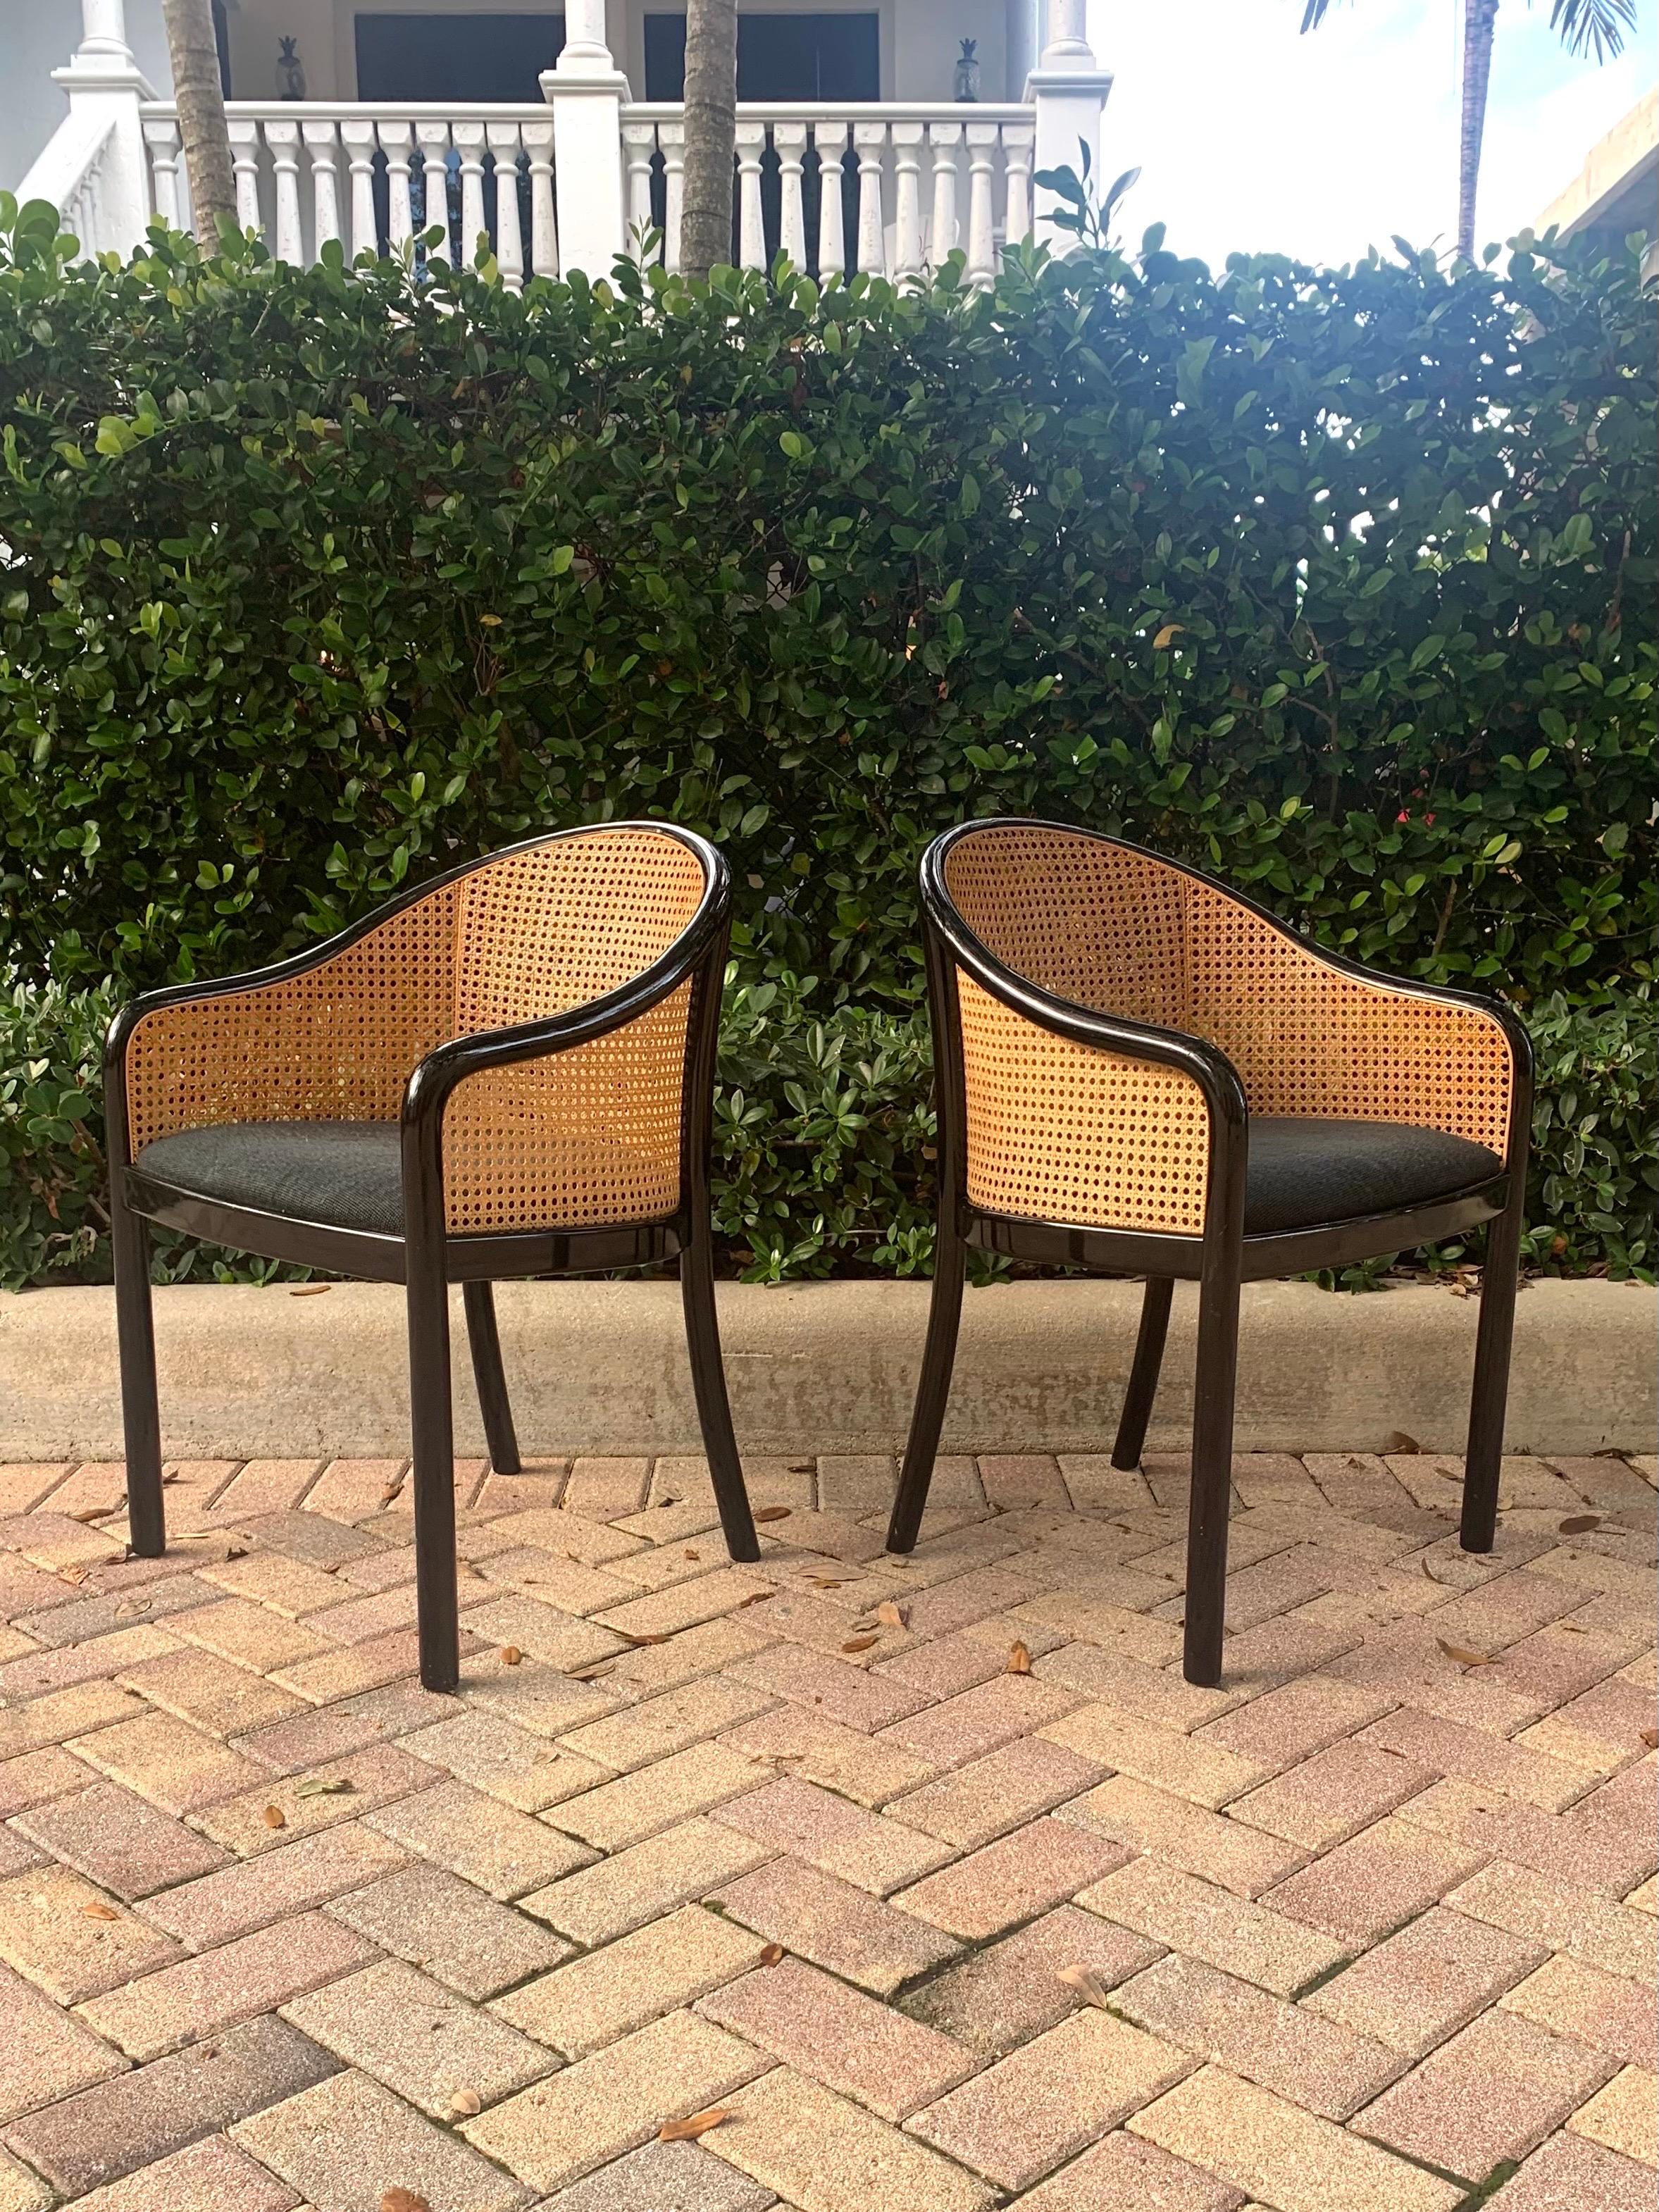 Beautiful pair of chairs based on Ward Bennett’s Landmark chair. In black lacquered wood and cane. With an upholstered cushion. Structure and cane are in great shape. 

With its simple flowing shape and cane back and sides the chairs effortlessly